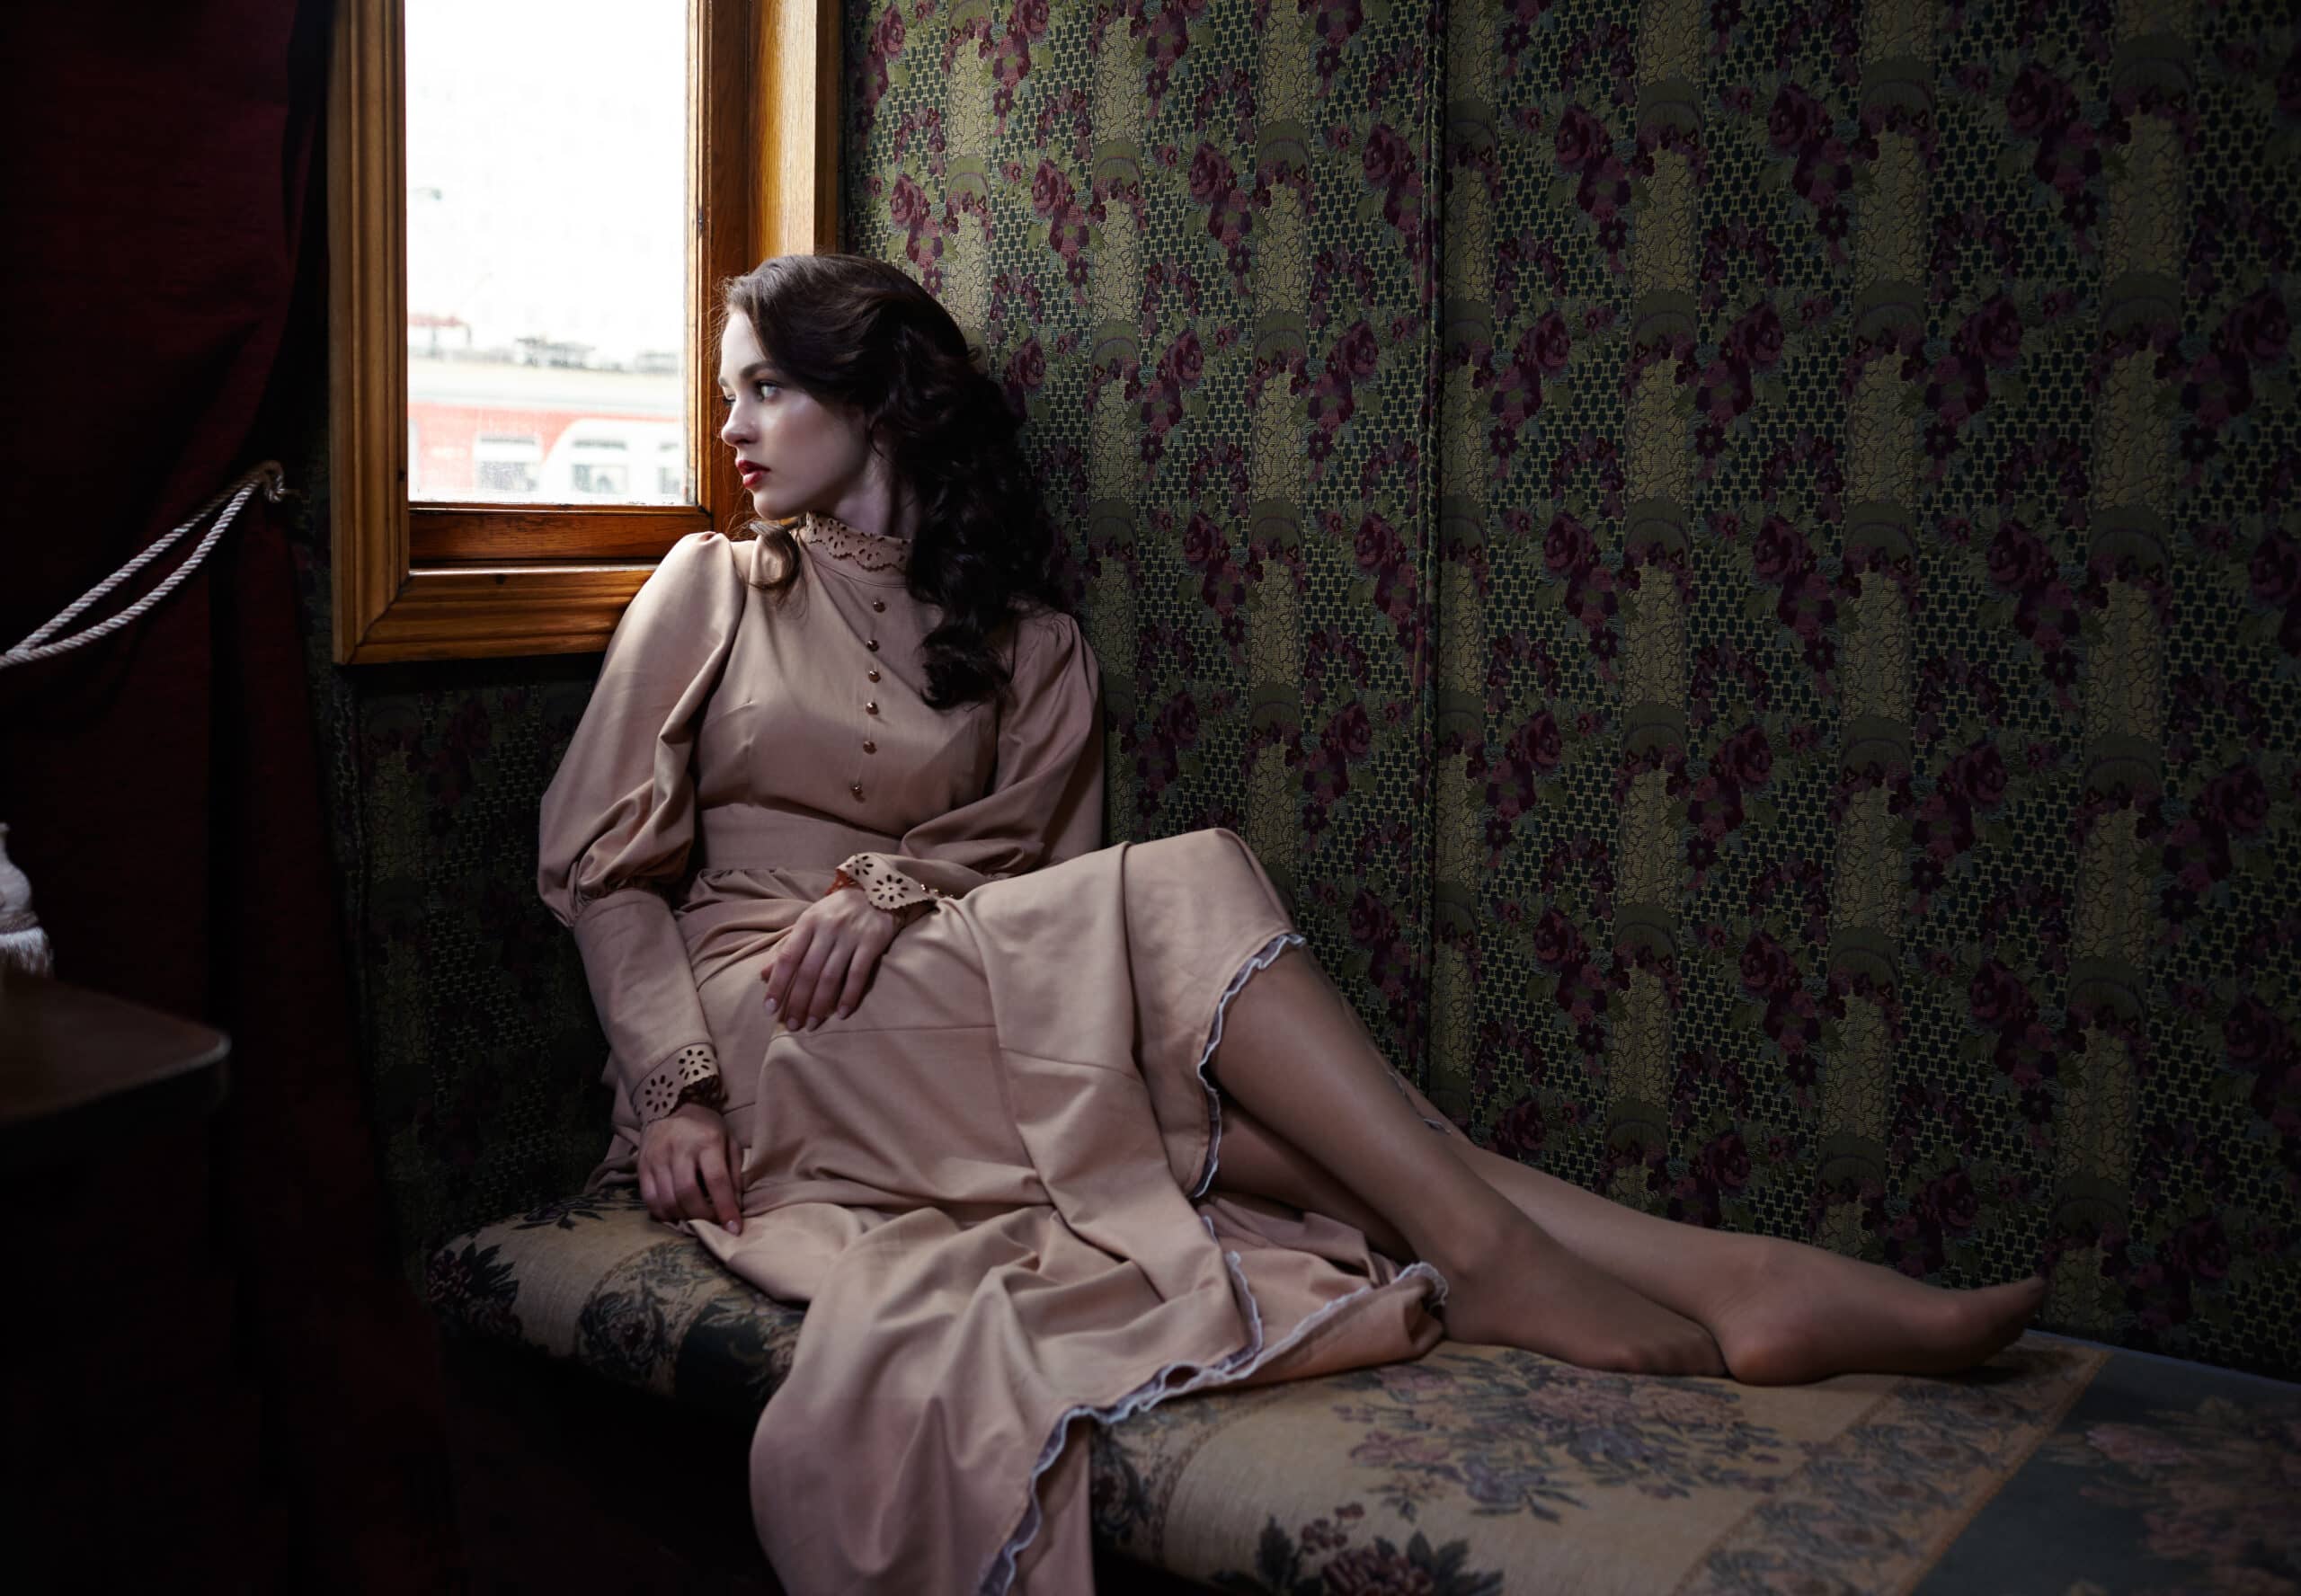 Young alluring woman in beige vintage dress of early 20th century sitting on a couch while looking out the window.